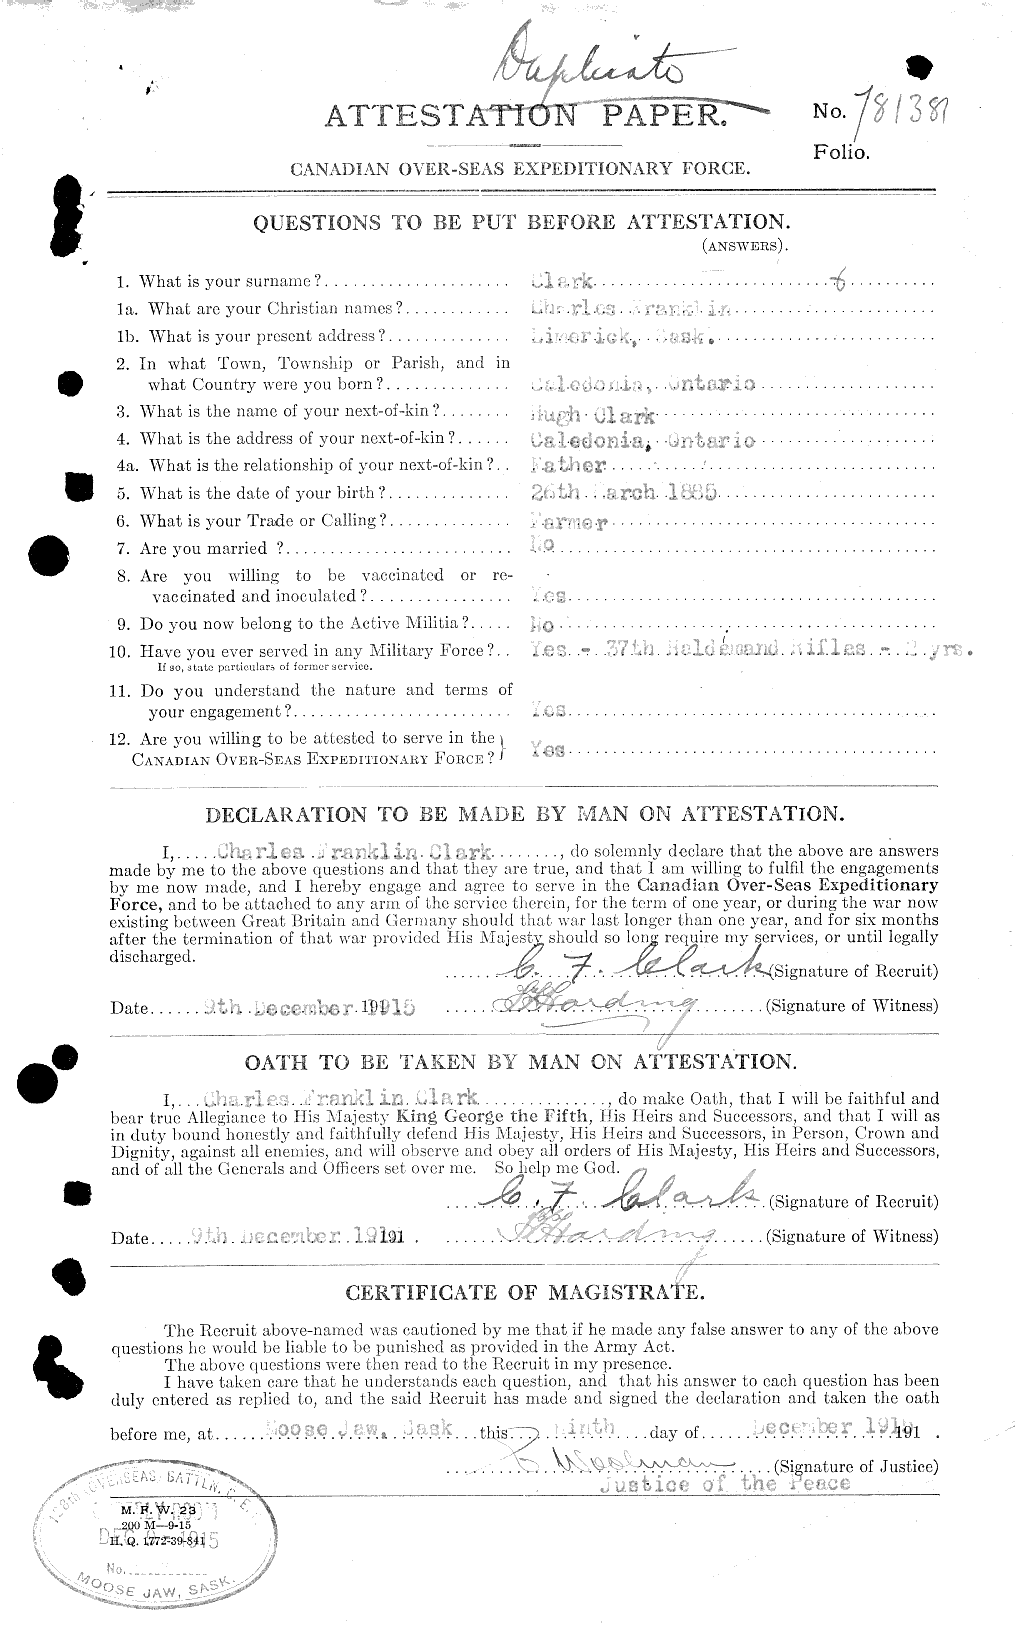 Personnel Records of the First World War - CEF 022930a